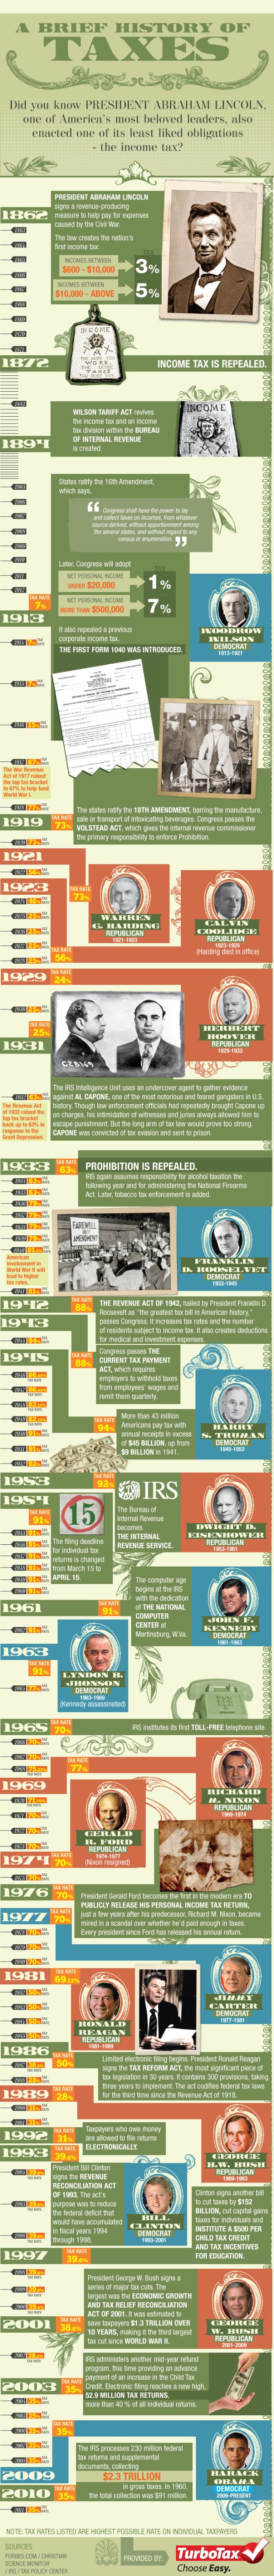 History of Taxes in the US